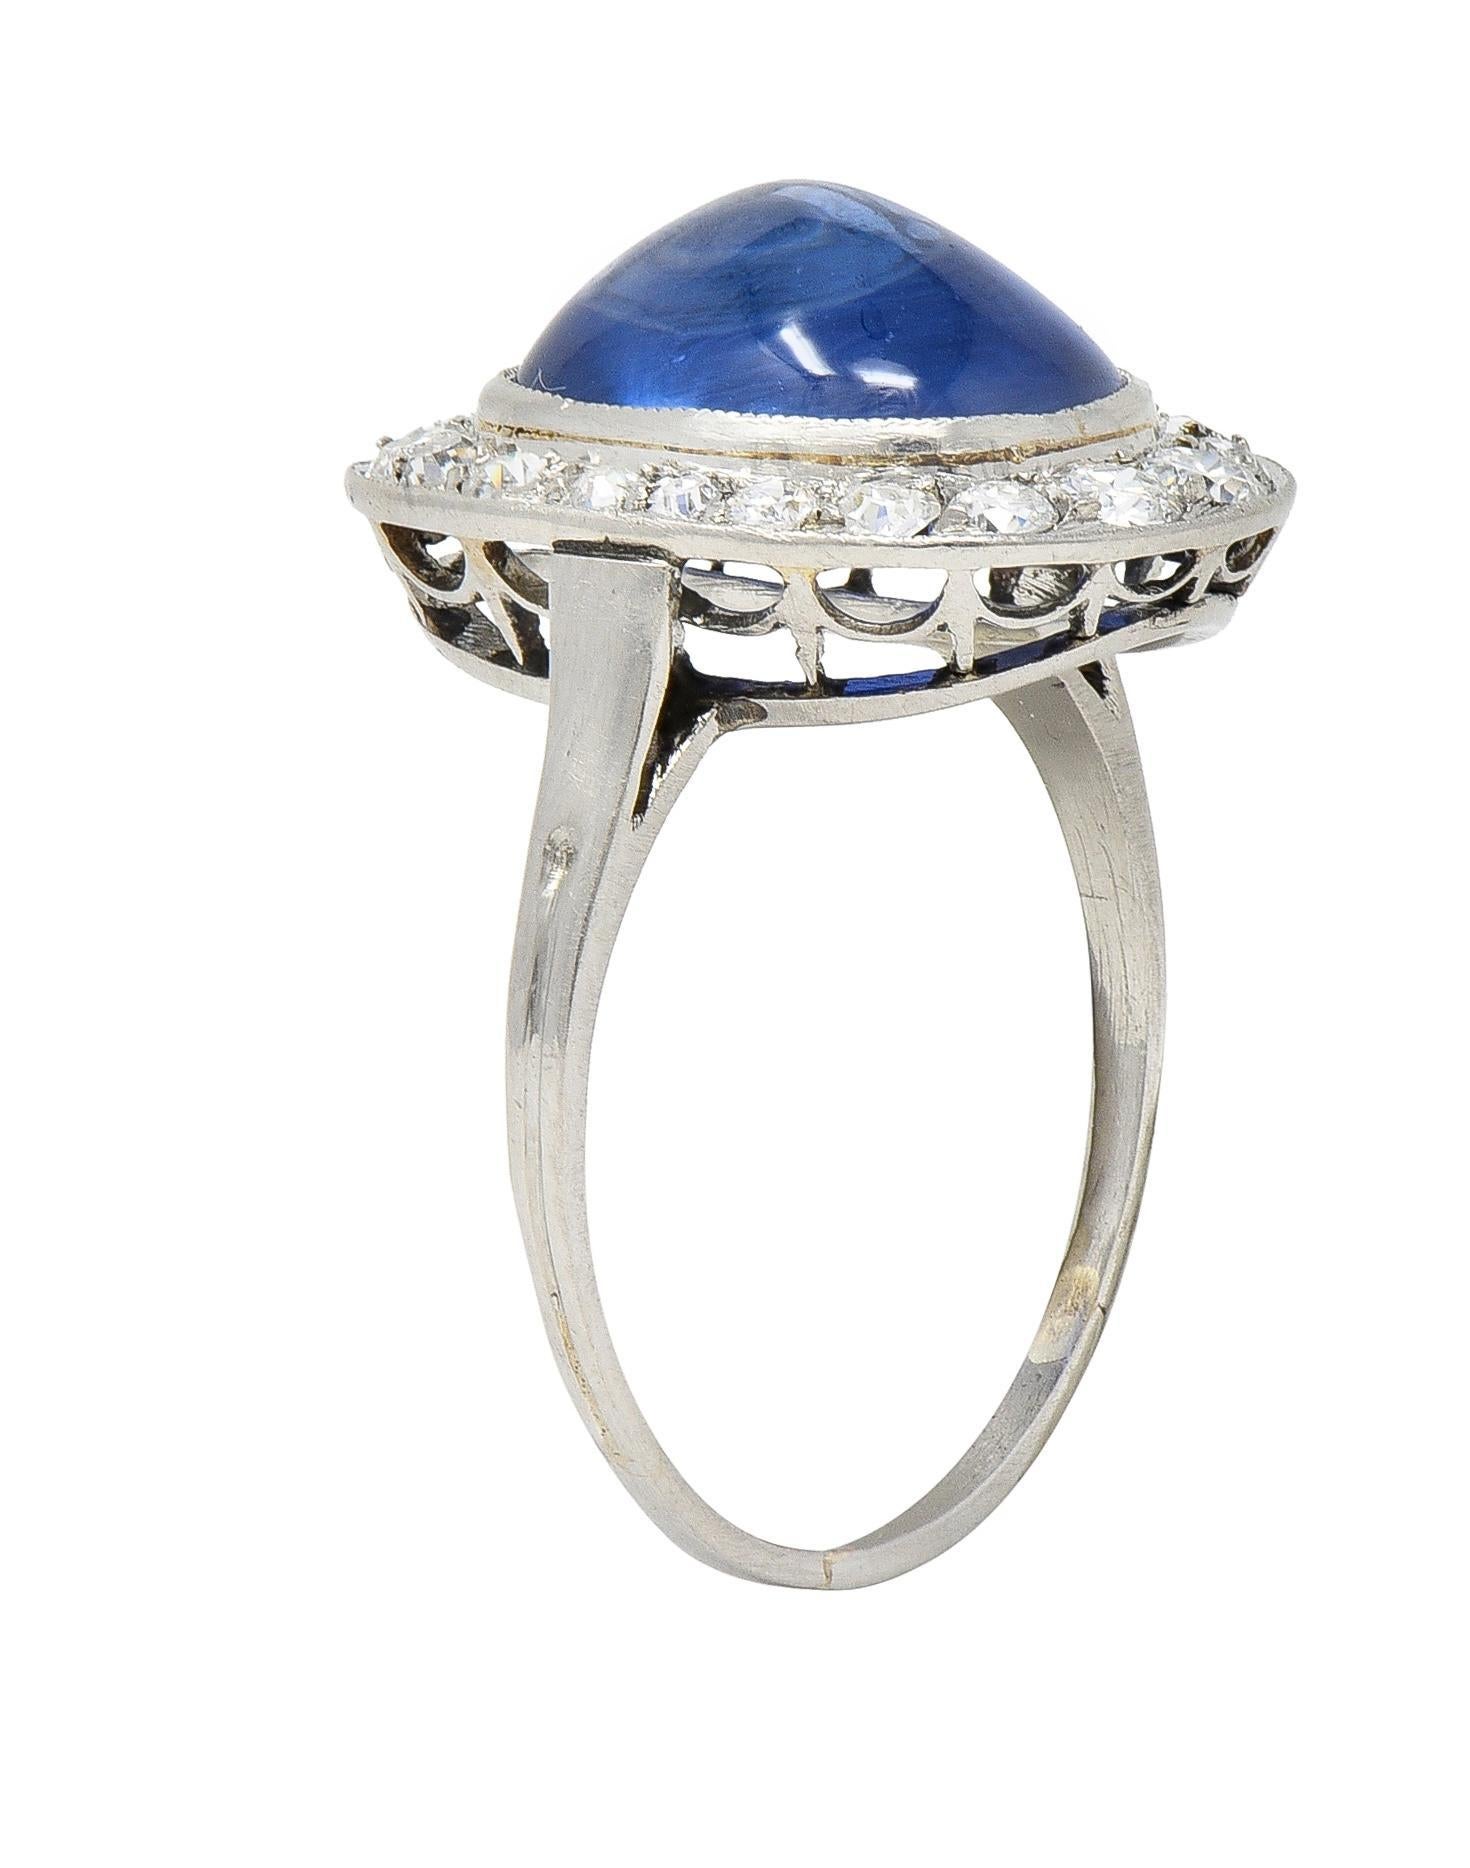 Centering a sugarloaf-shaped sapphire cabochon weighing 6.12 carats - transparent medium blue 
Natural Burmese in origin with no indications of heat treatment - bezel set
With a halo surround of old European and transitional cut diamonds 
Weighing